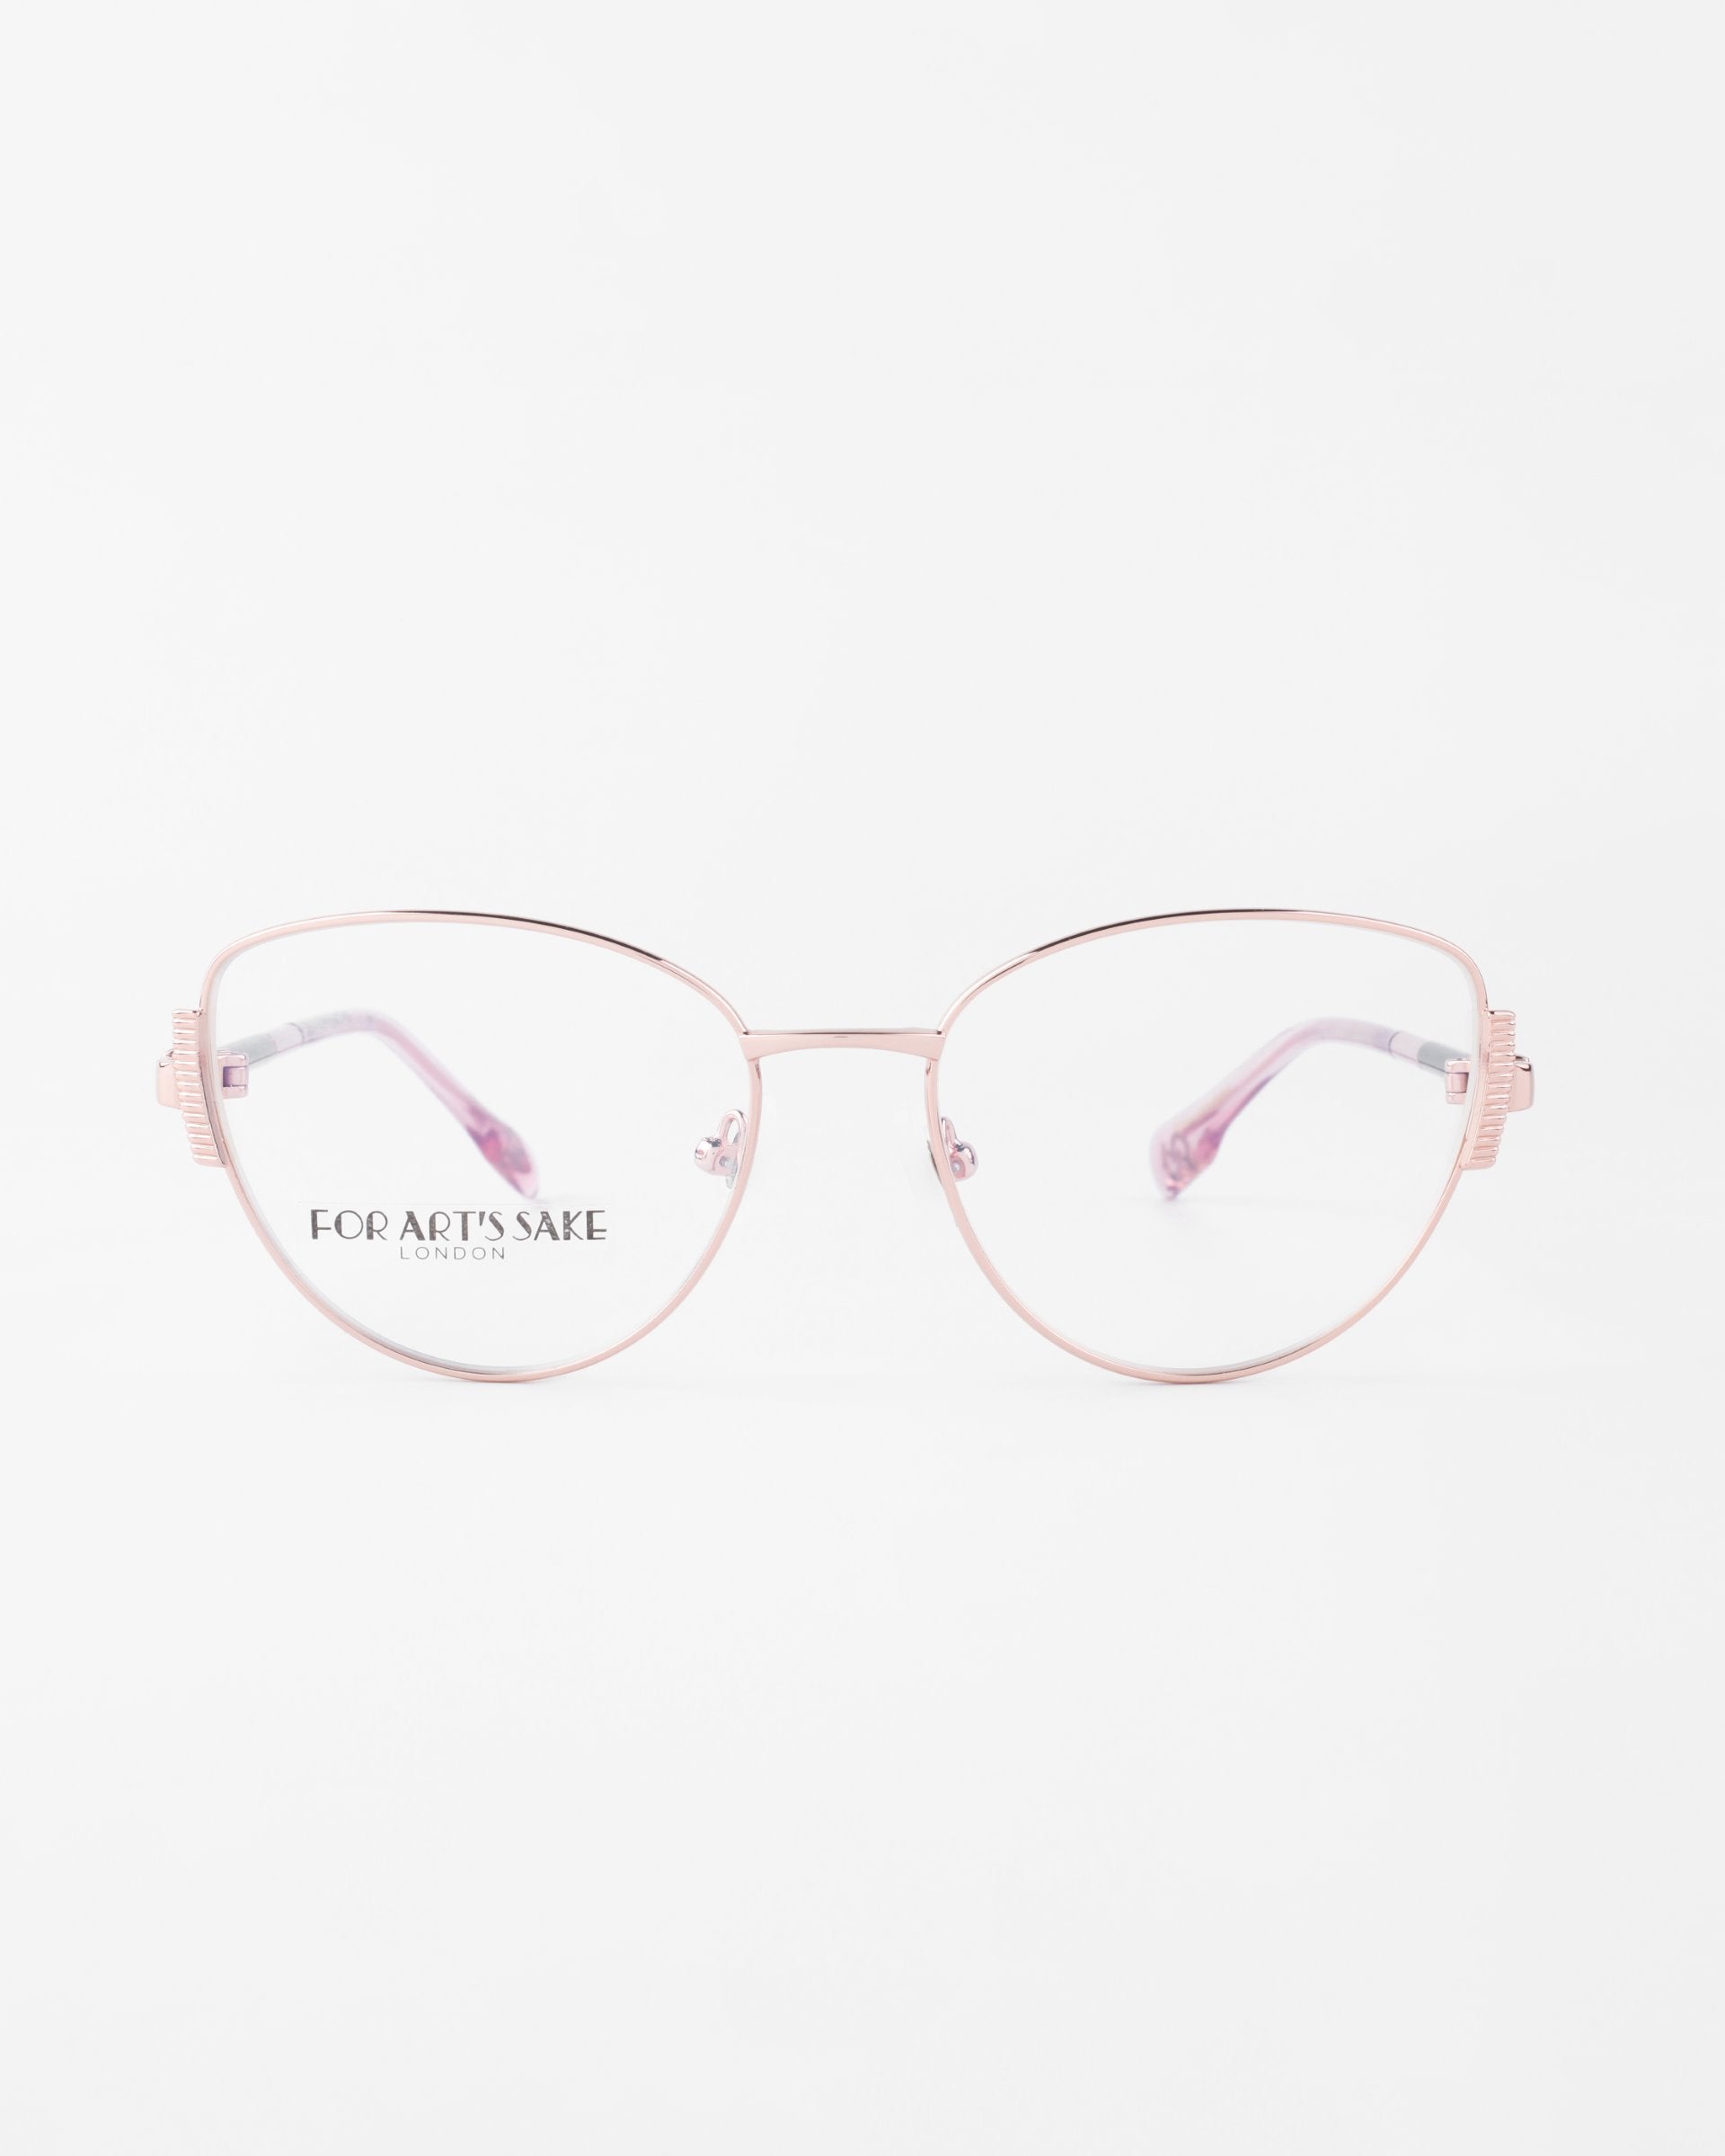 A pair of stylish, cat-eye glasses with thin, light pink metal frames and clear lenses. The brand "For Art's Sake®" is visible on the left lens. Featuring jade stone nose pads for added comfort, the background is white to highlight the delicate design and intricate detailing of the Dante glasses.